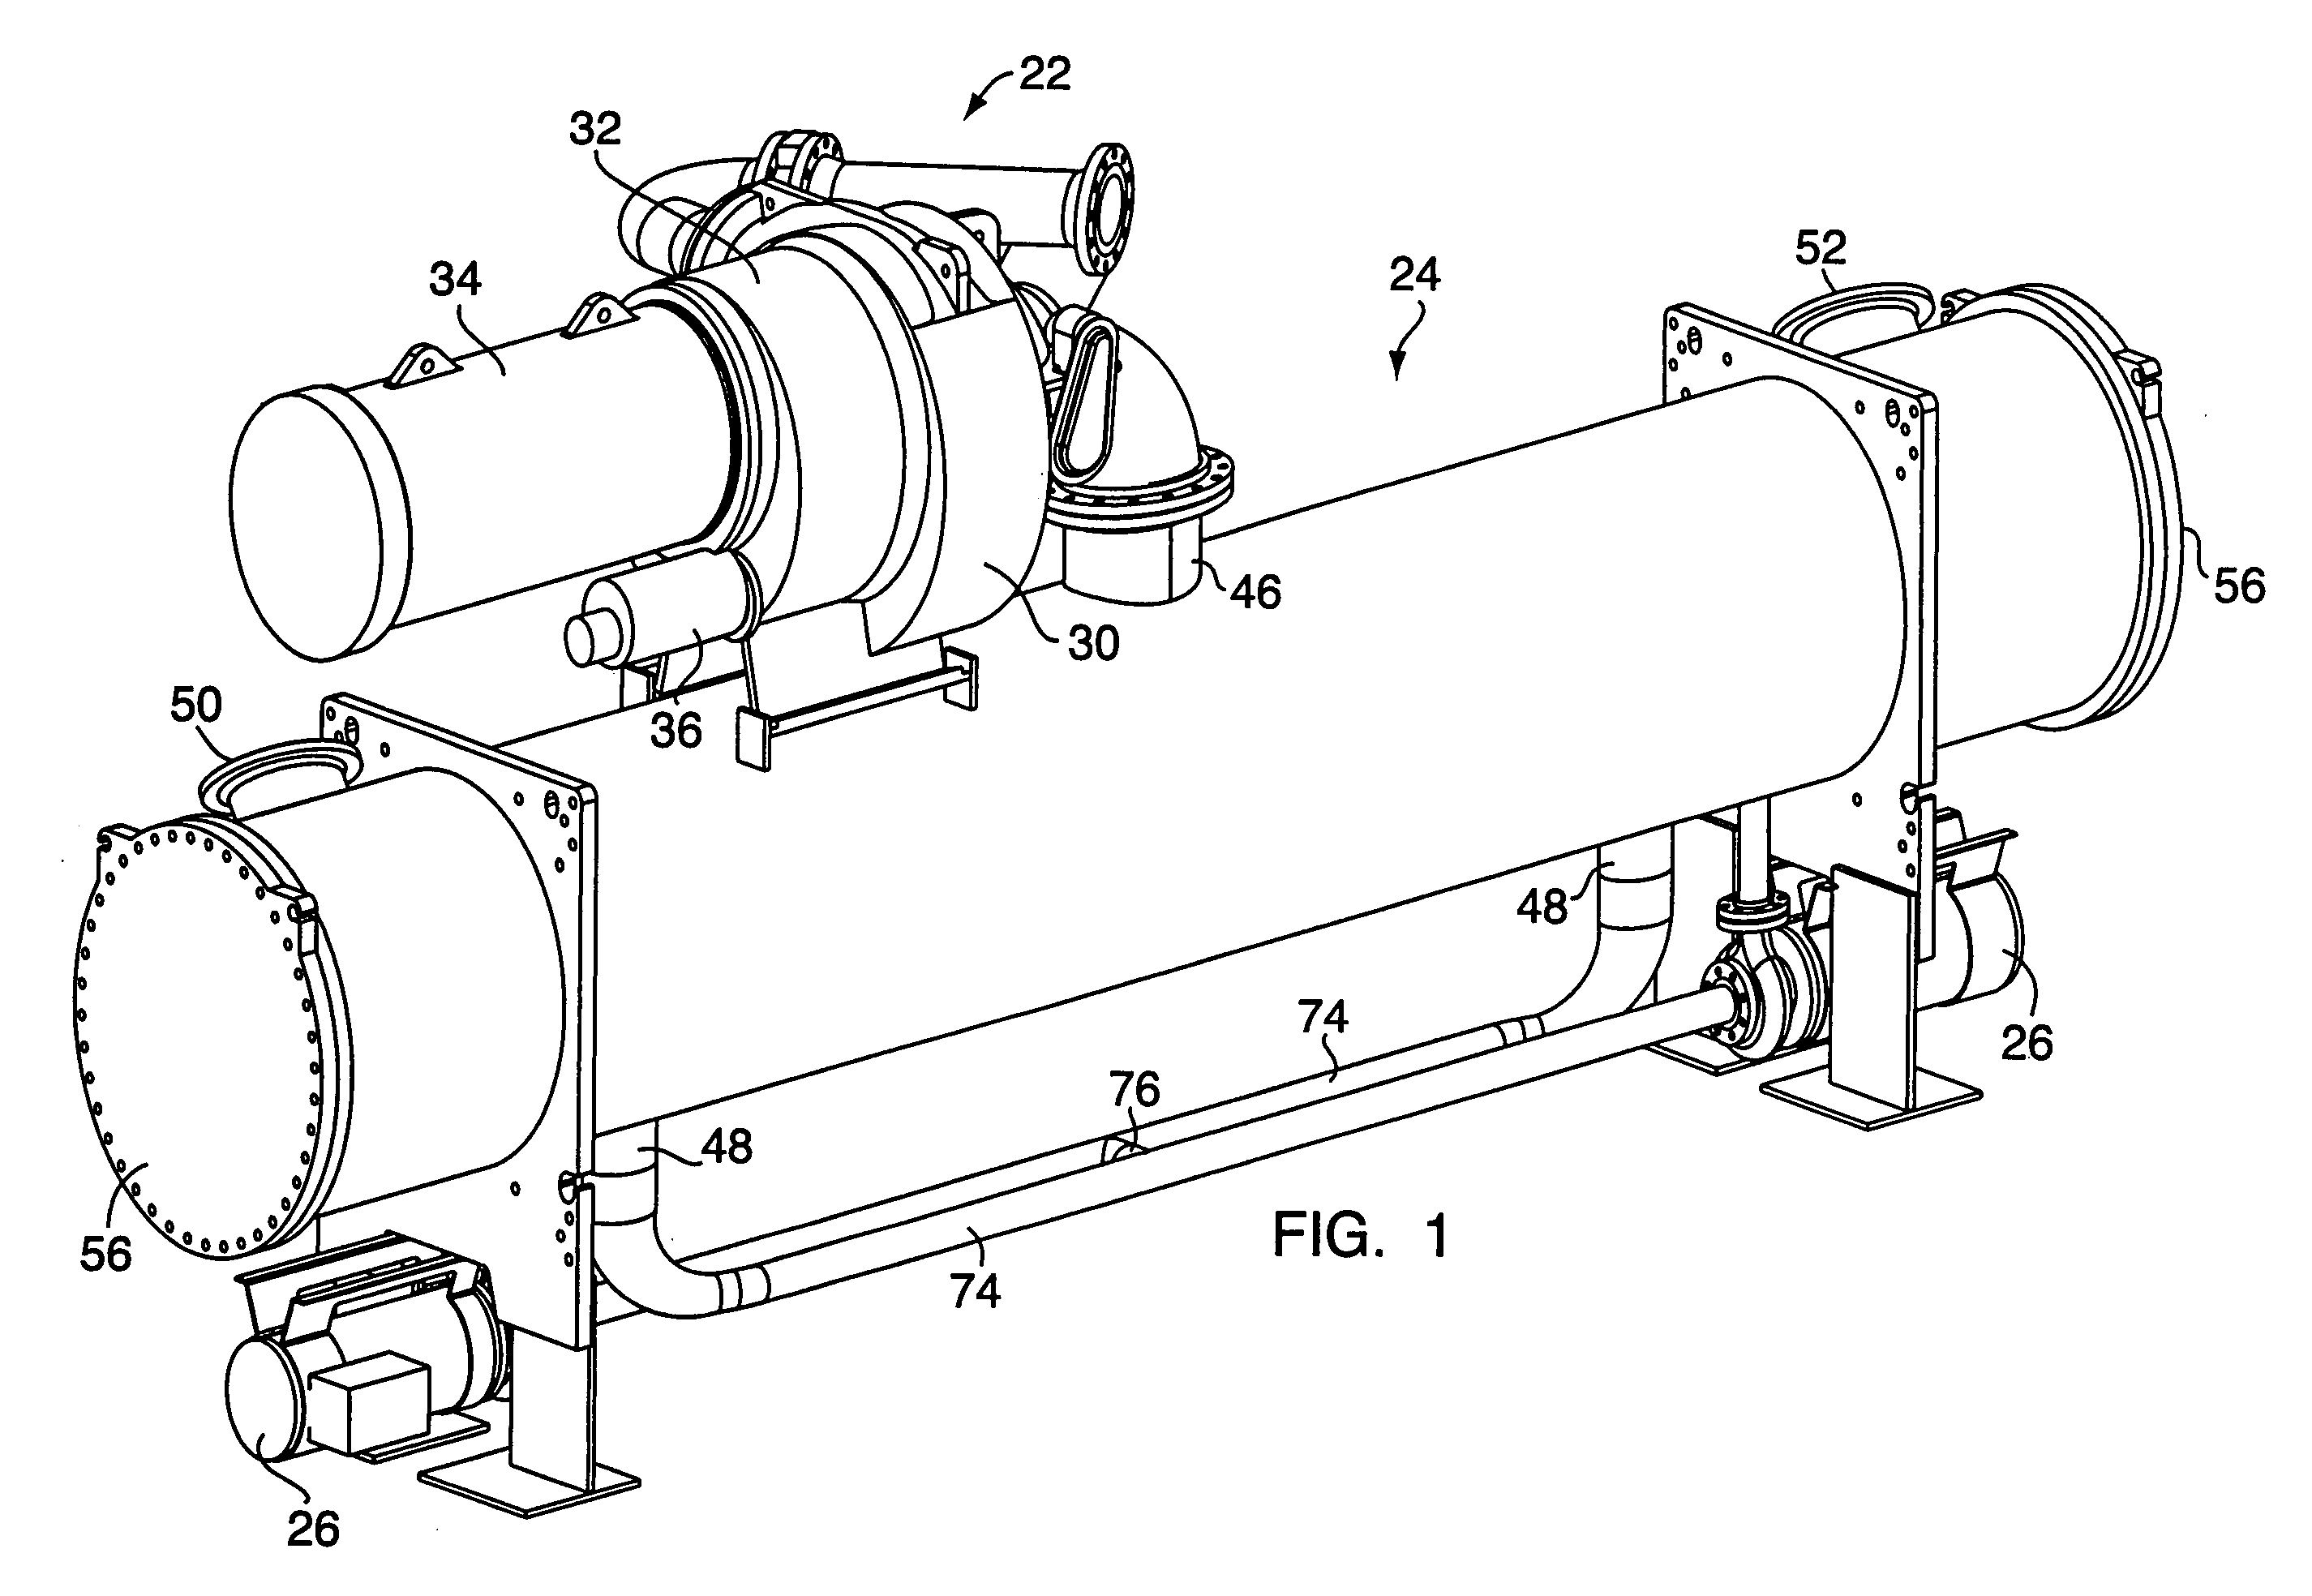 Method and apparatus for power generation using waste heat